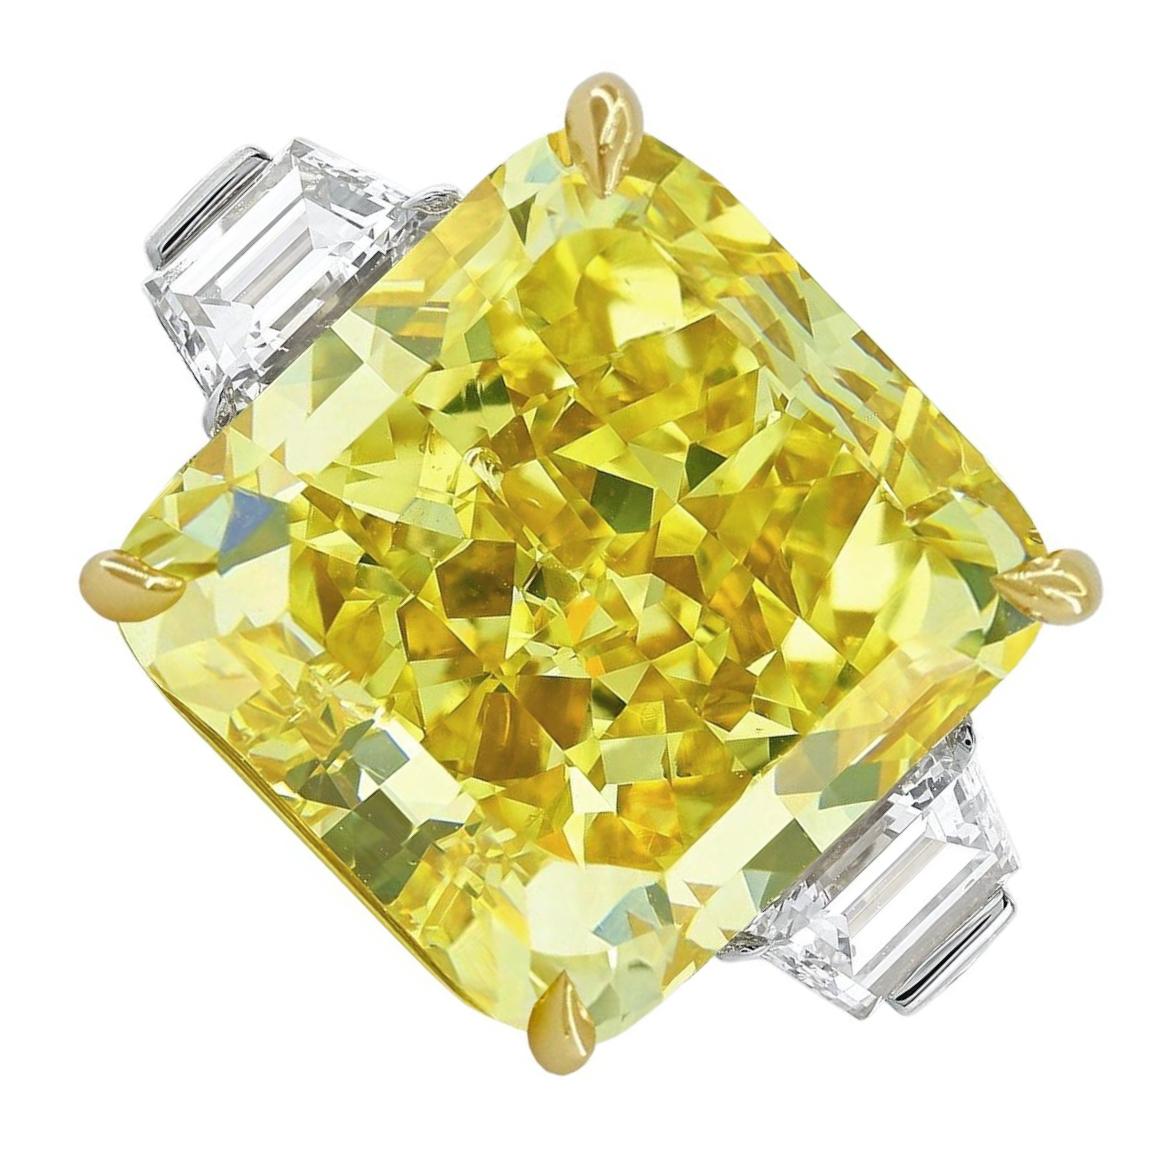  GIA Certified 12 Carat Diamond Fancy Intense Yellow Cushion Cut Ring, set in solid platinum.

Crafted to perfection and certified by GIA, this breathtaking ring features a stunning 12 carat cushion cut diamond with a mesmerizing fancy intense